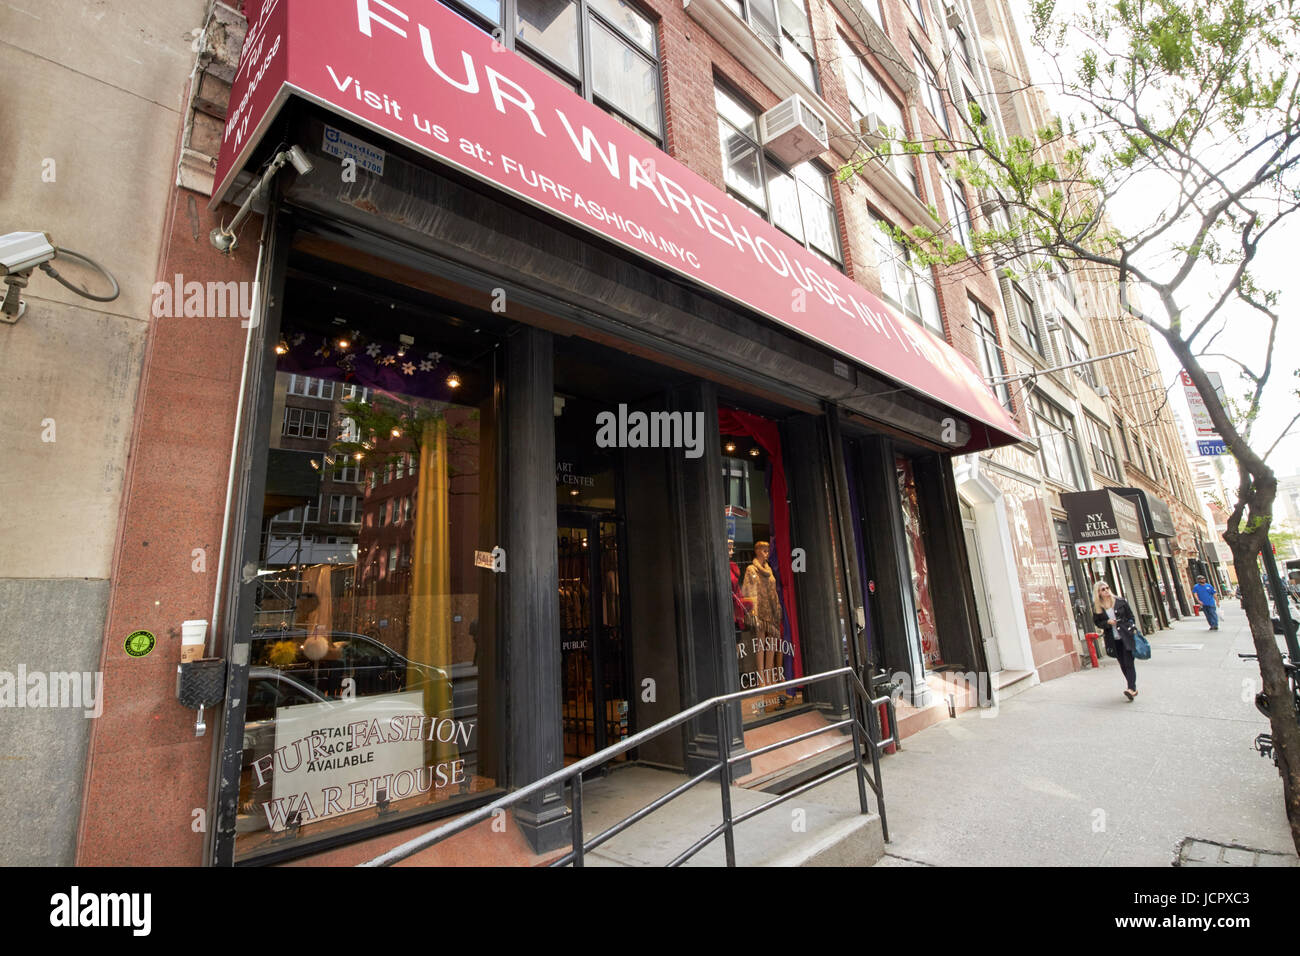 row of shops selling furs in fashion district New York City USA Stock Photo